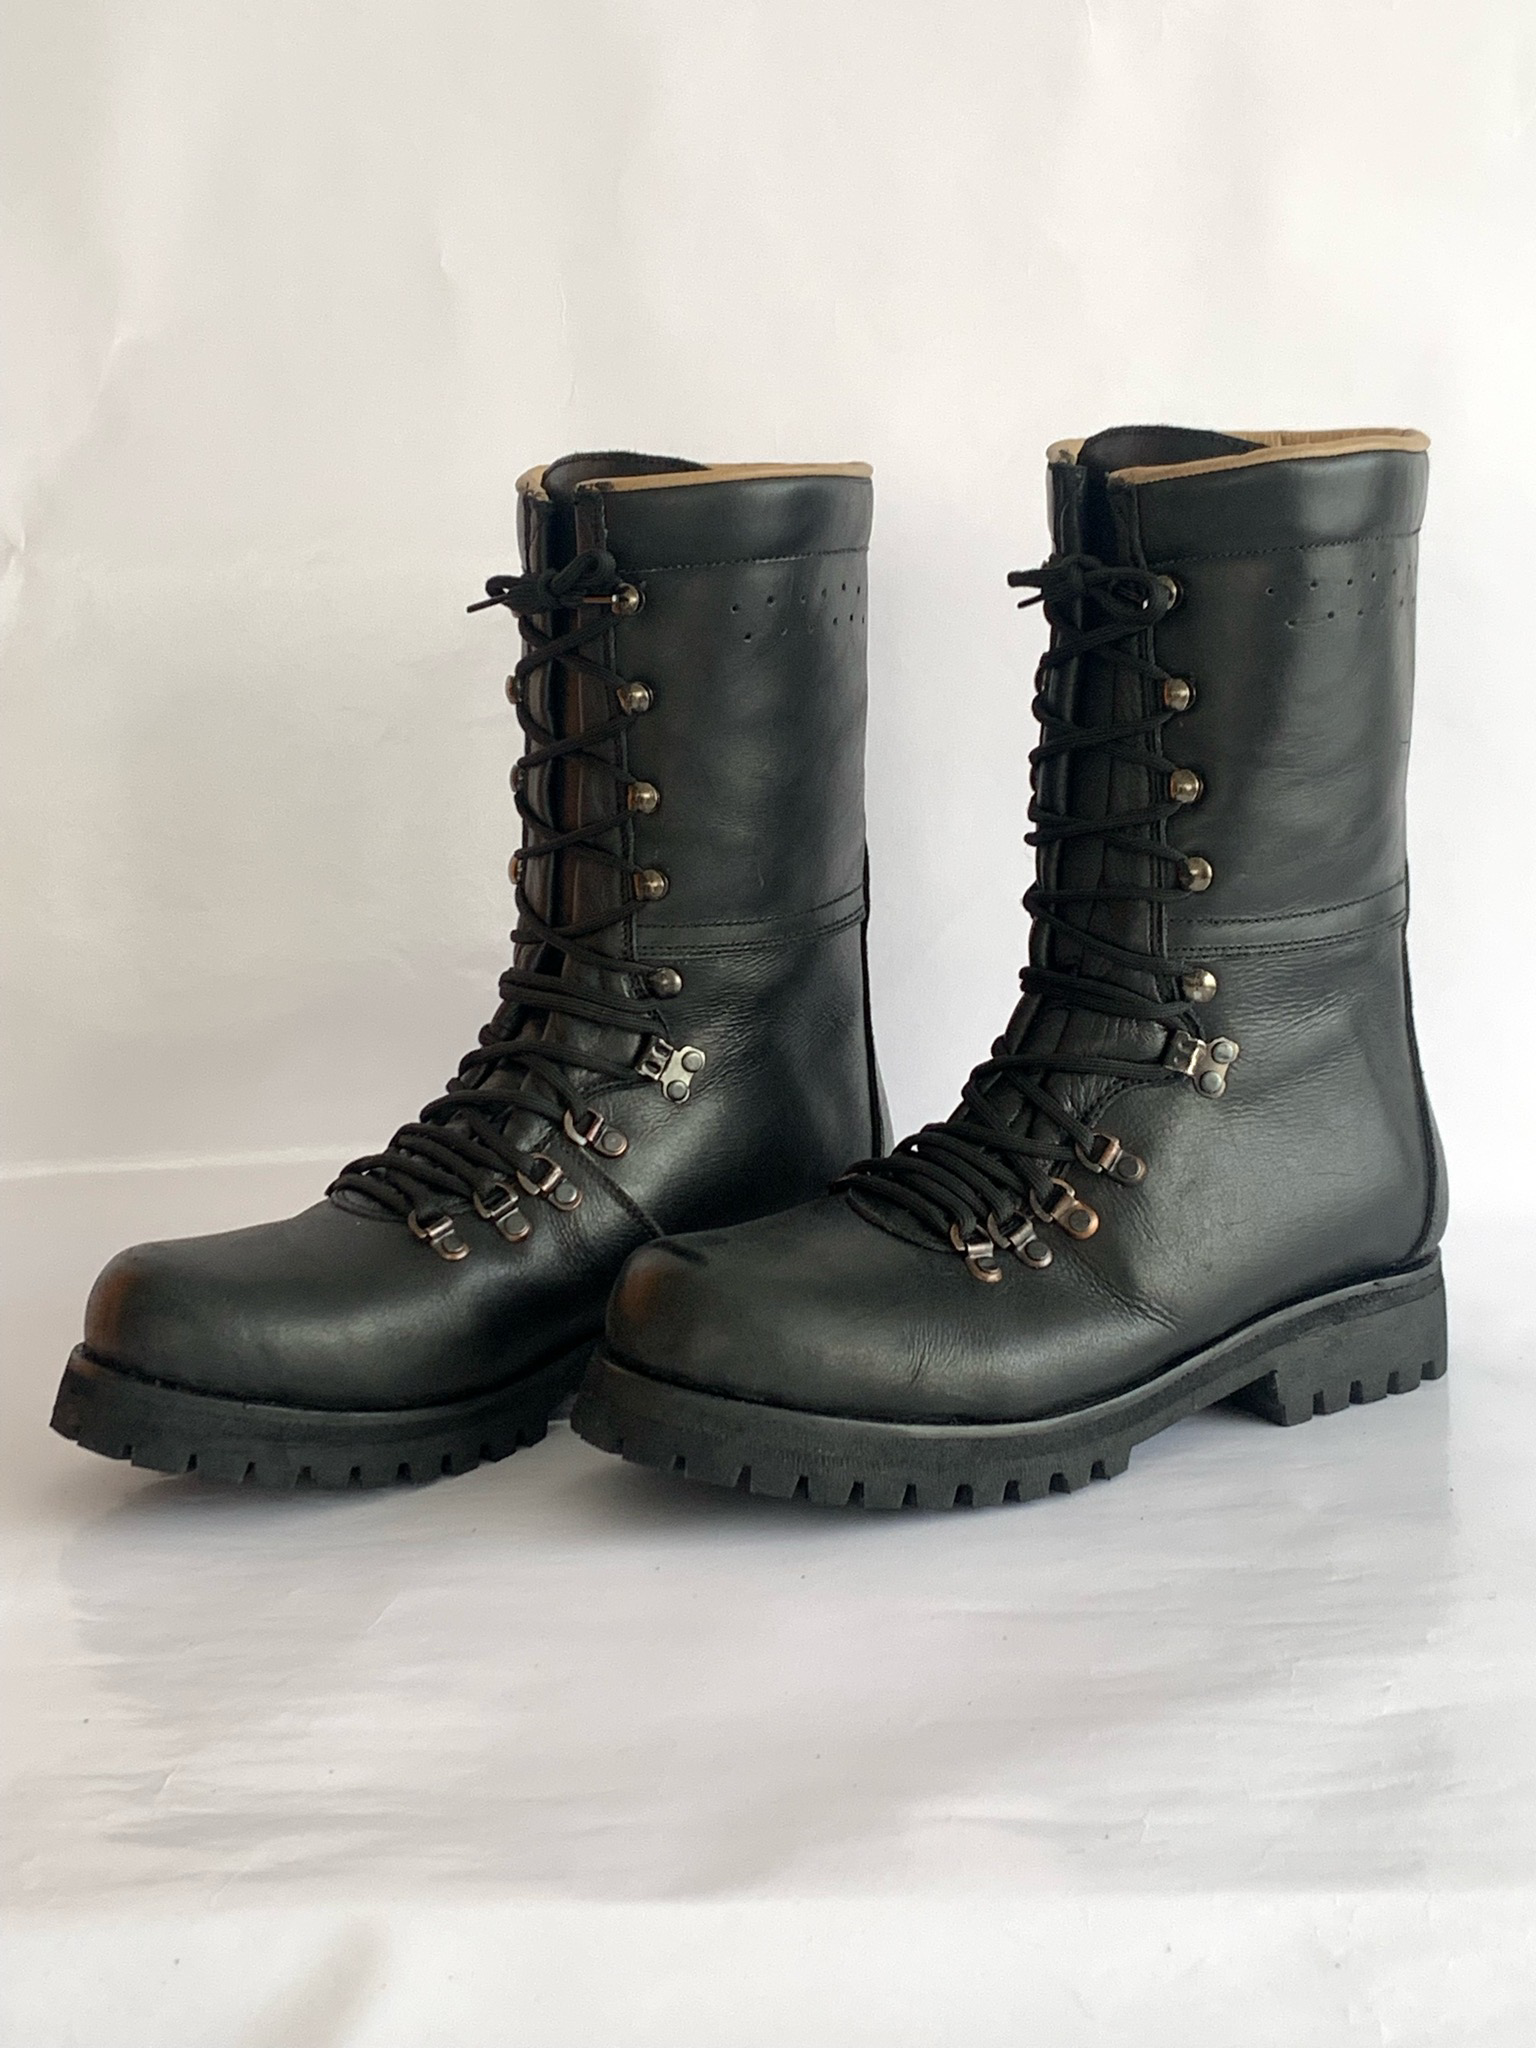 The Bat Austrian army Boots Replica Only